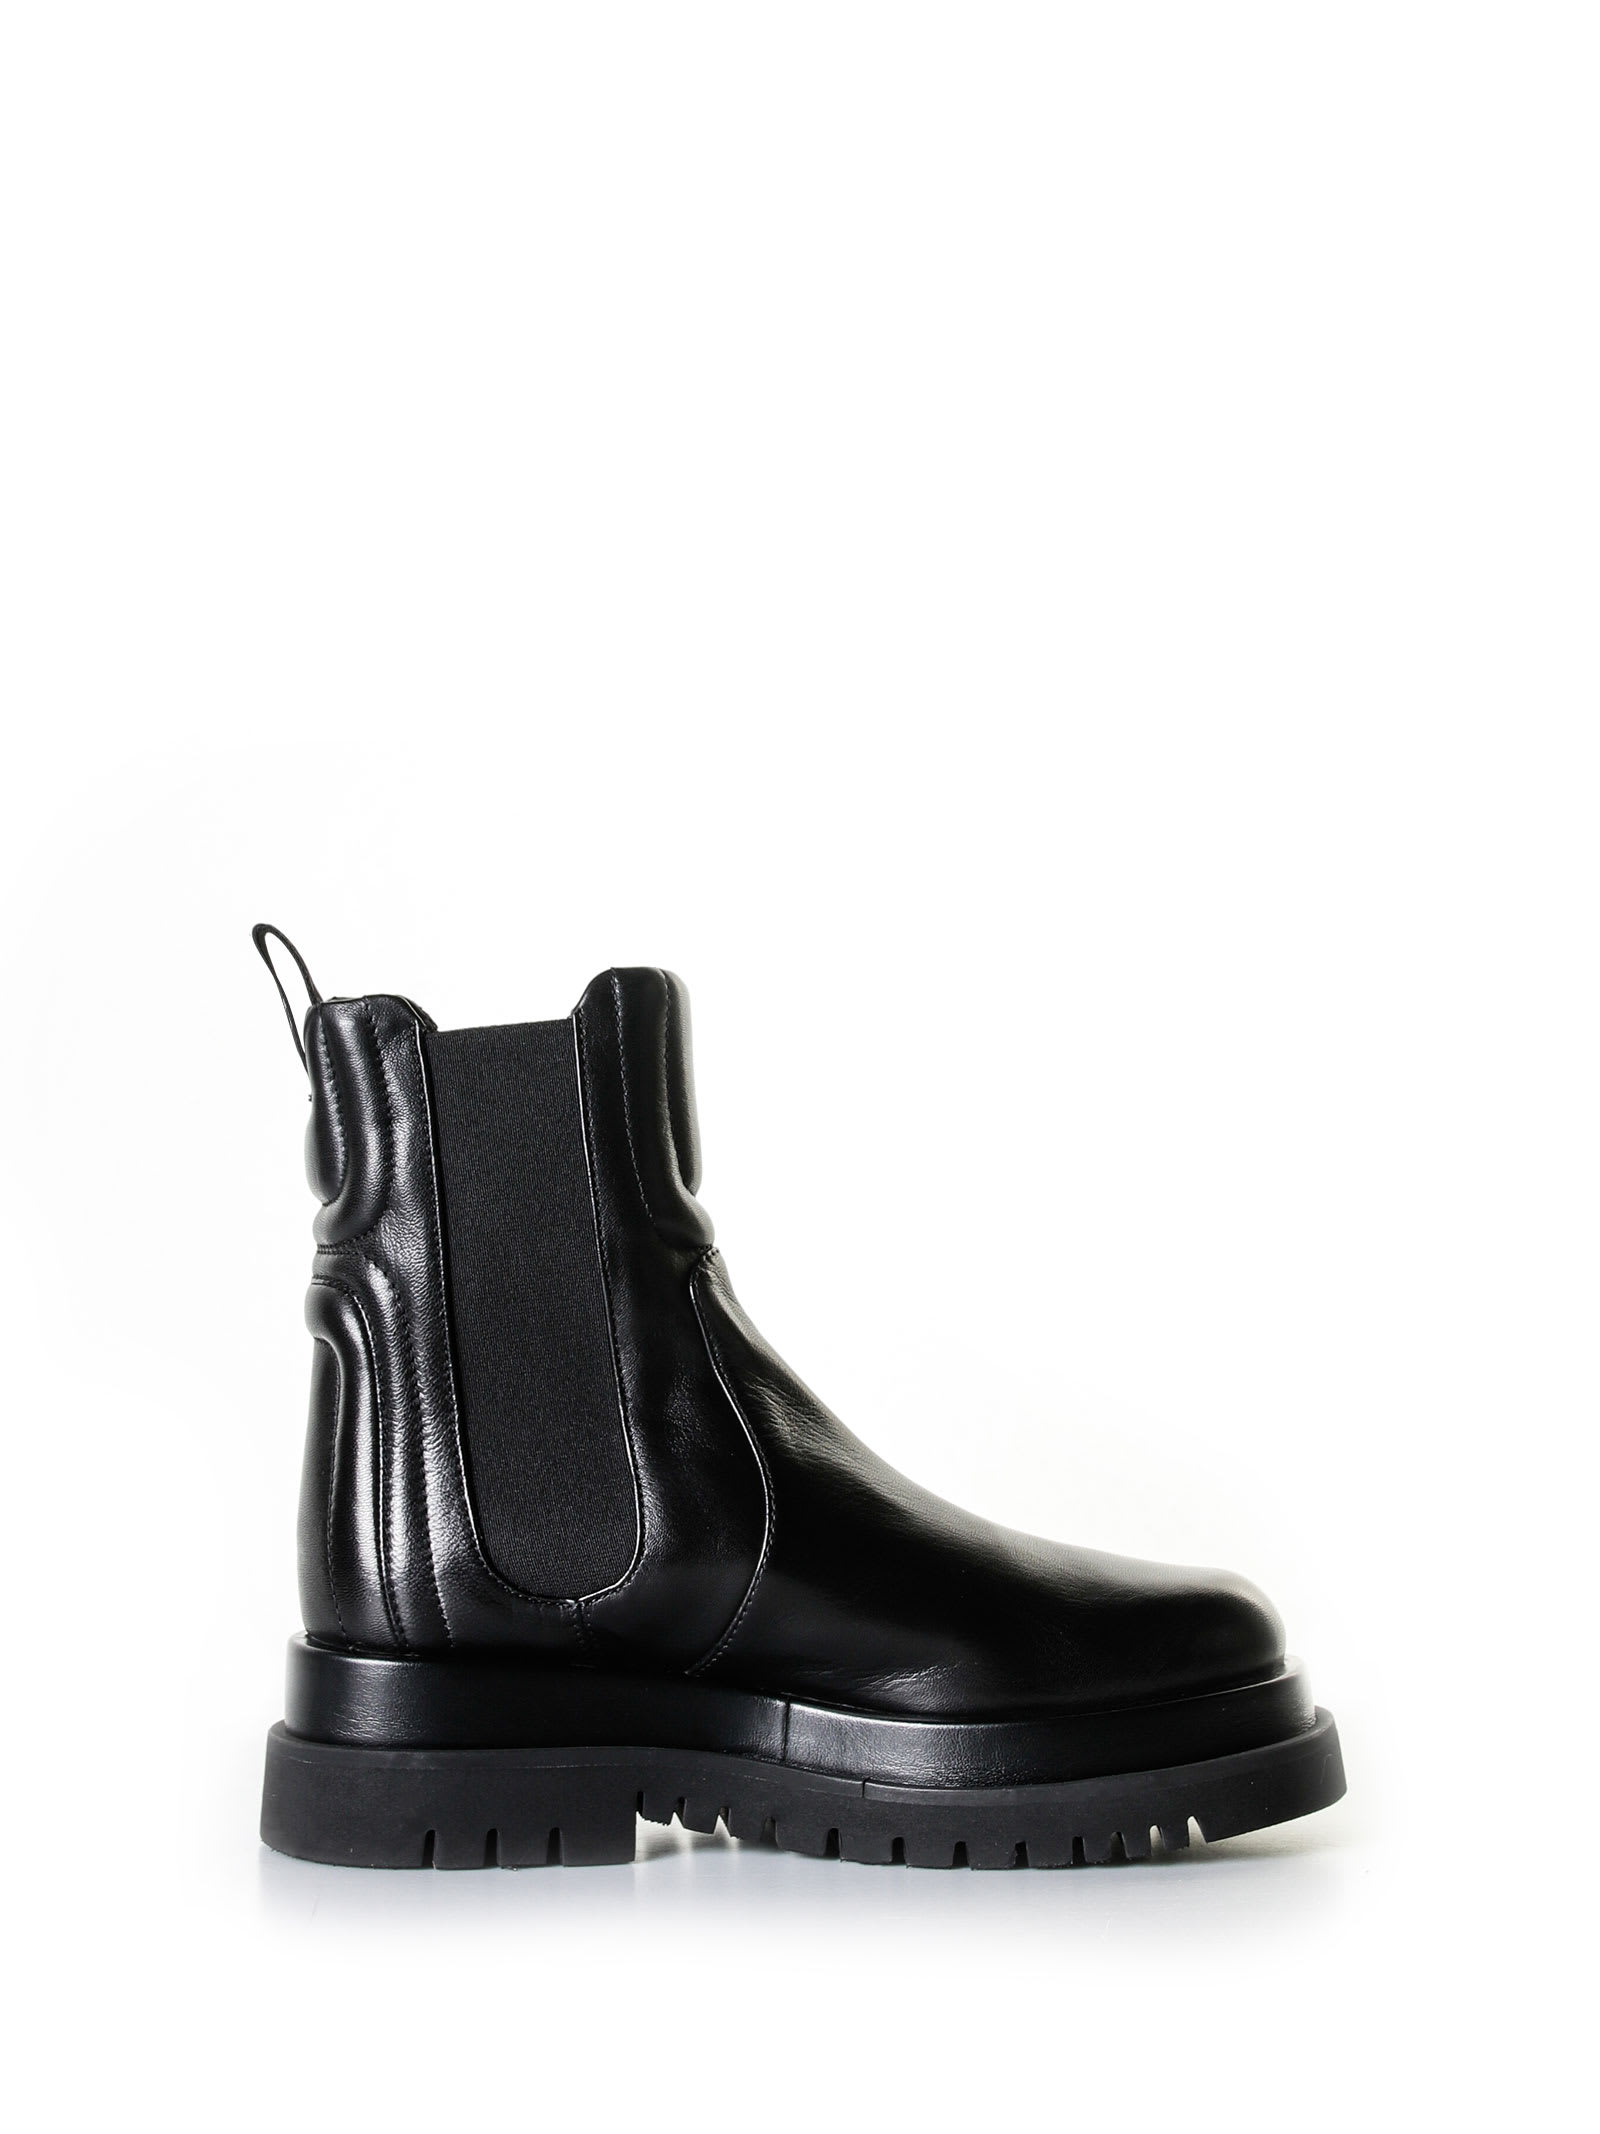 Fabi Beatle Boots In Nappa Leather